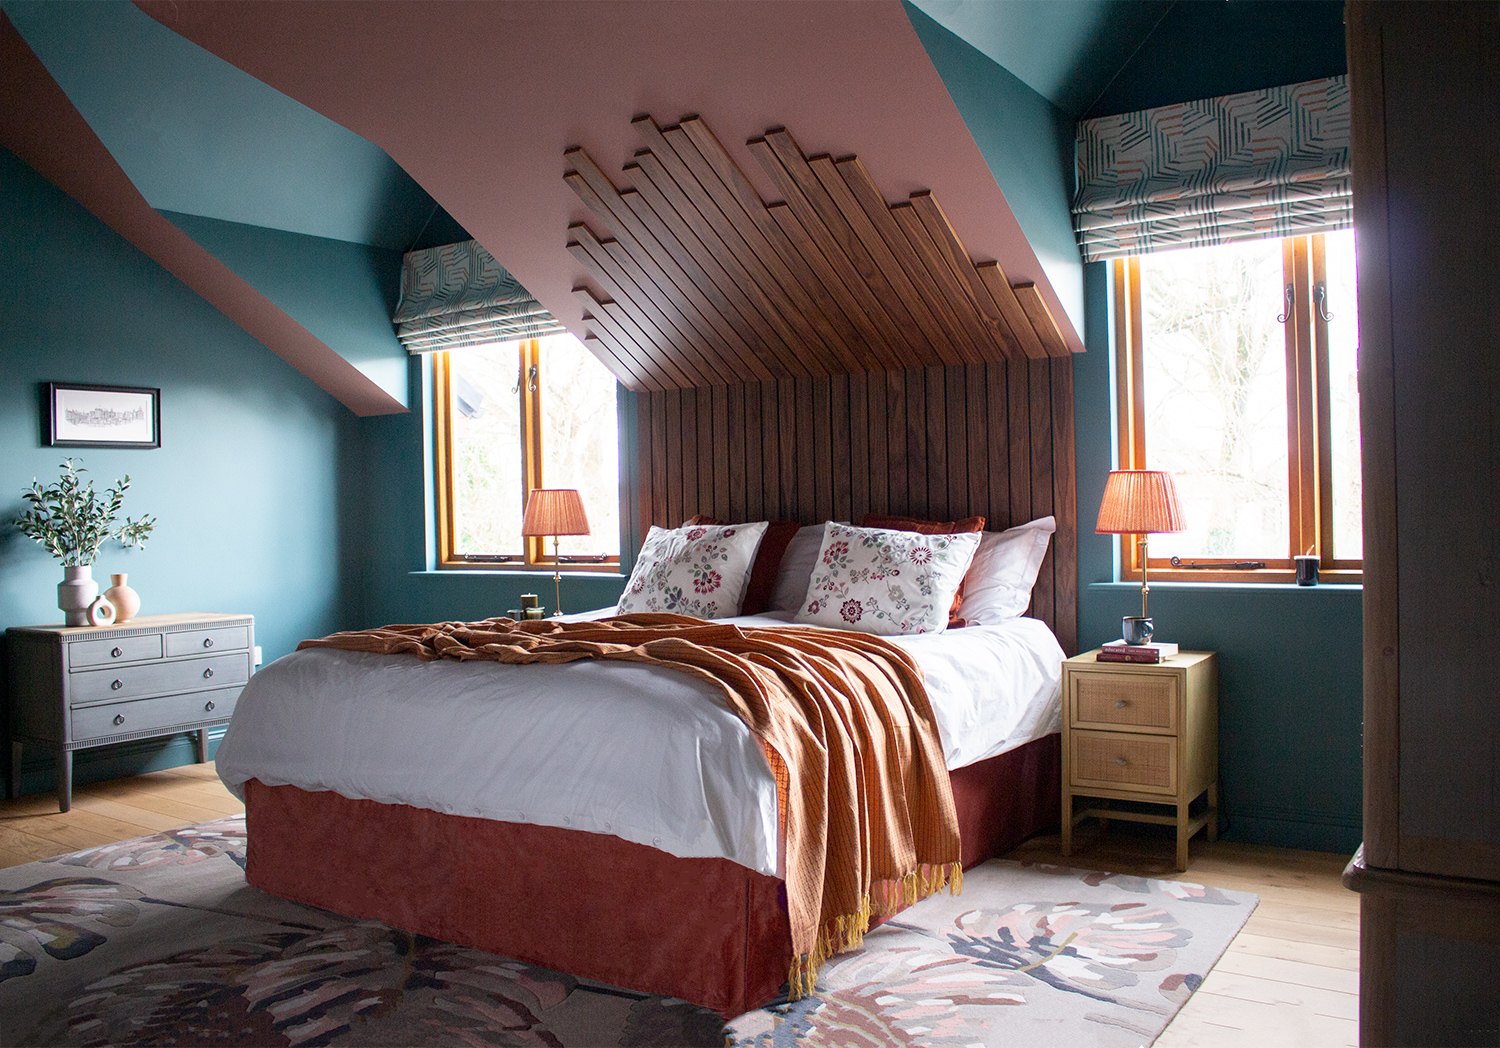 A bedroom with a large wooden headboard that also covers the ceiling